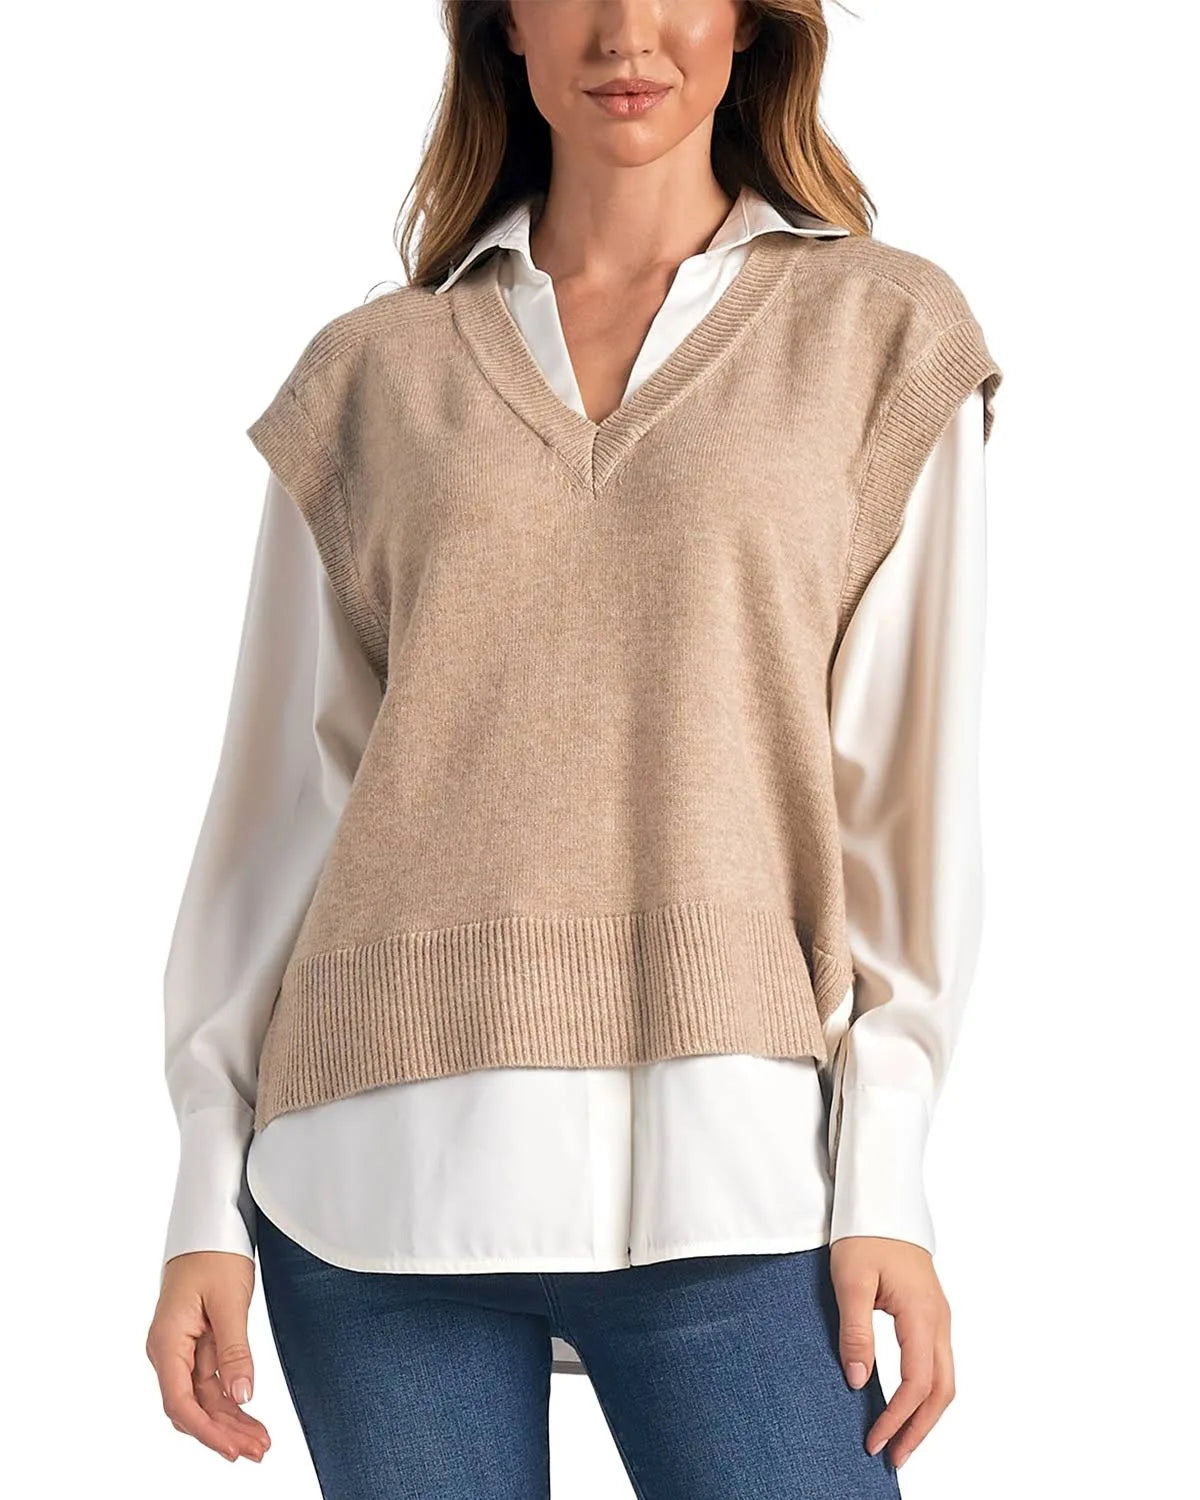 Sweater Vest/Shirt Combo in Taupe/White